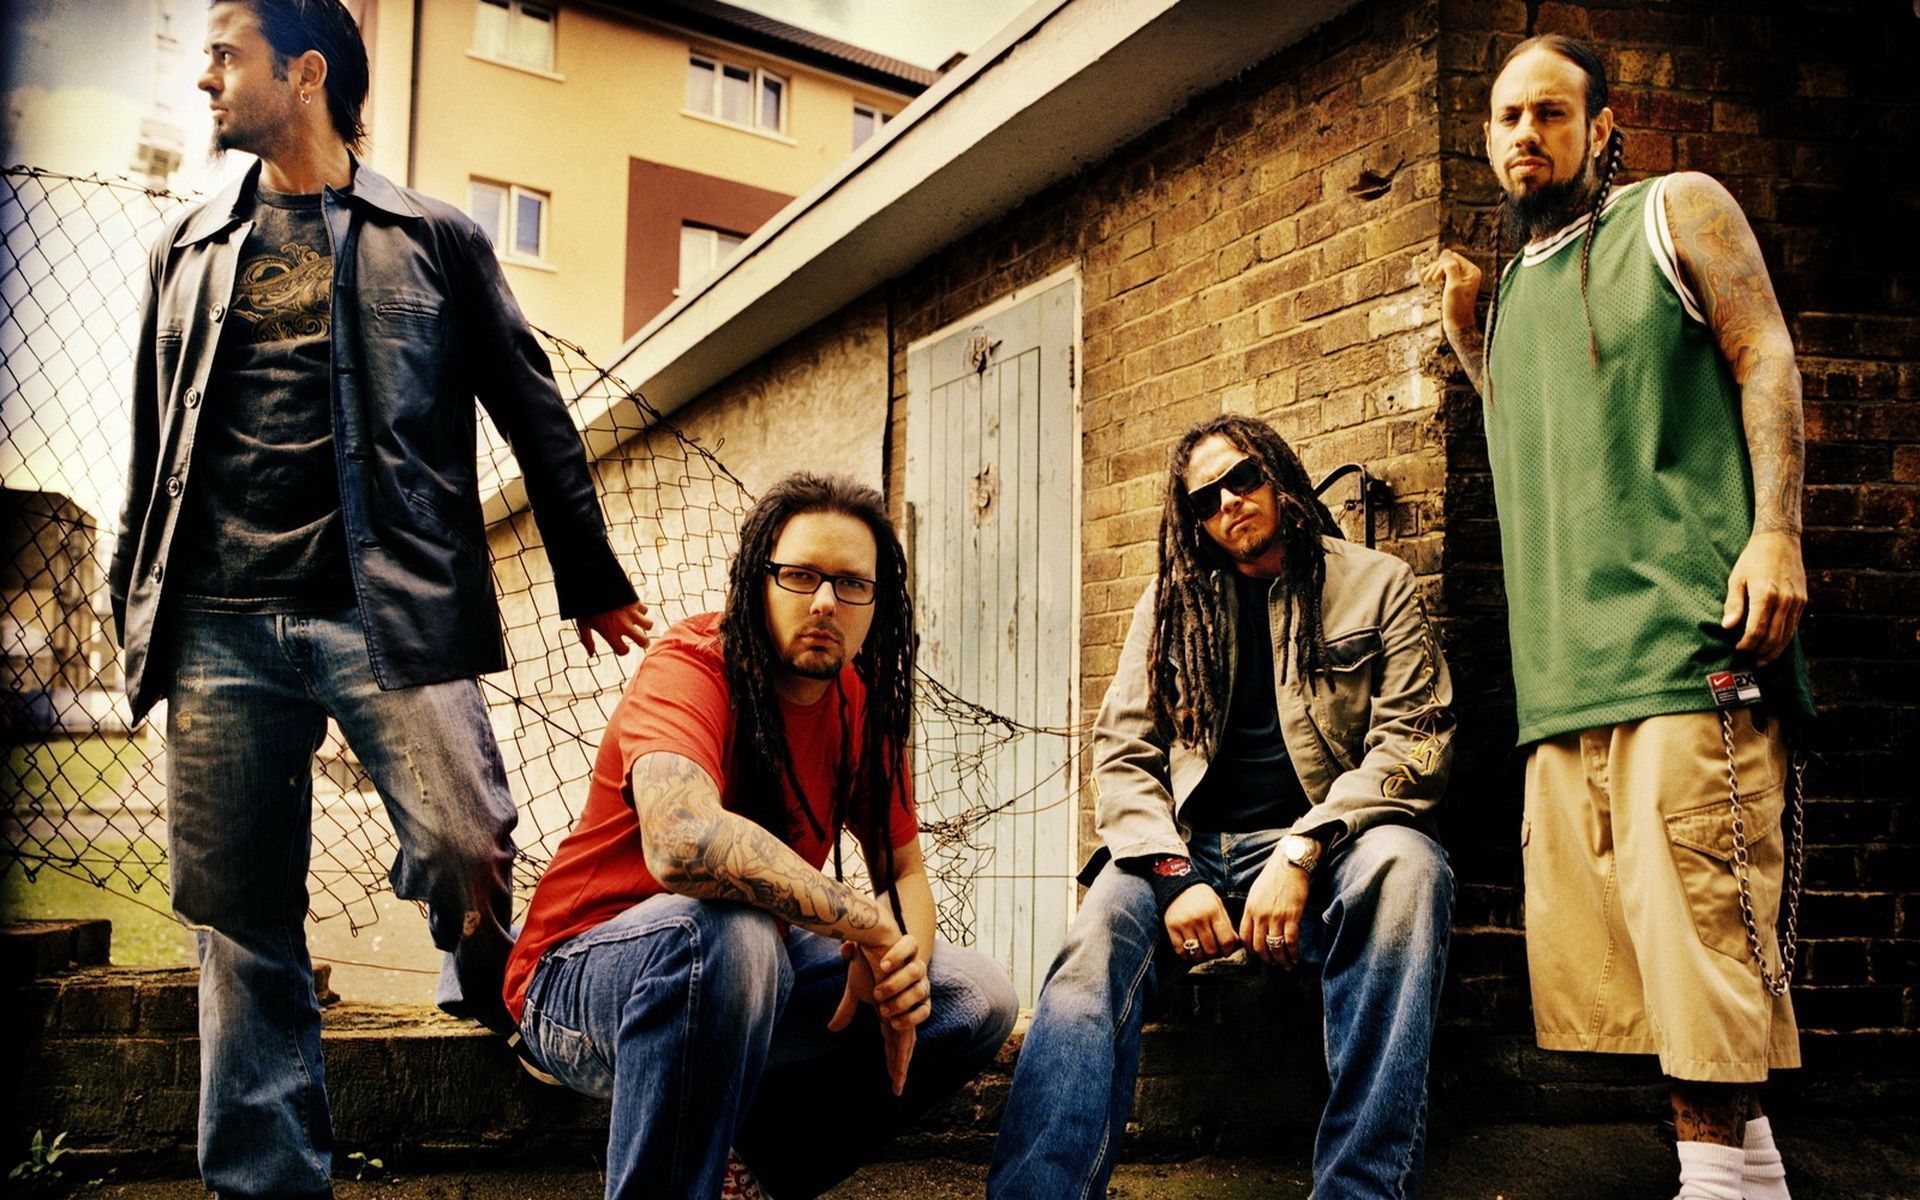 group Korn wallpapers and images - wallpapers, pictures, photos